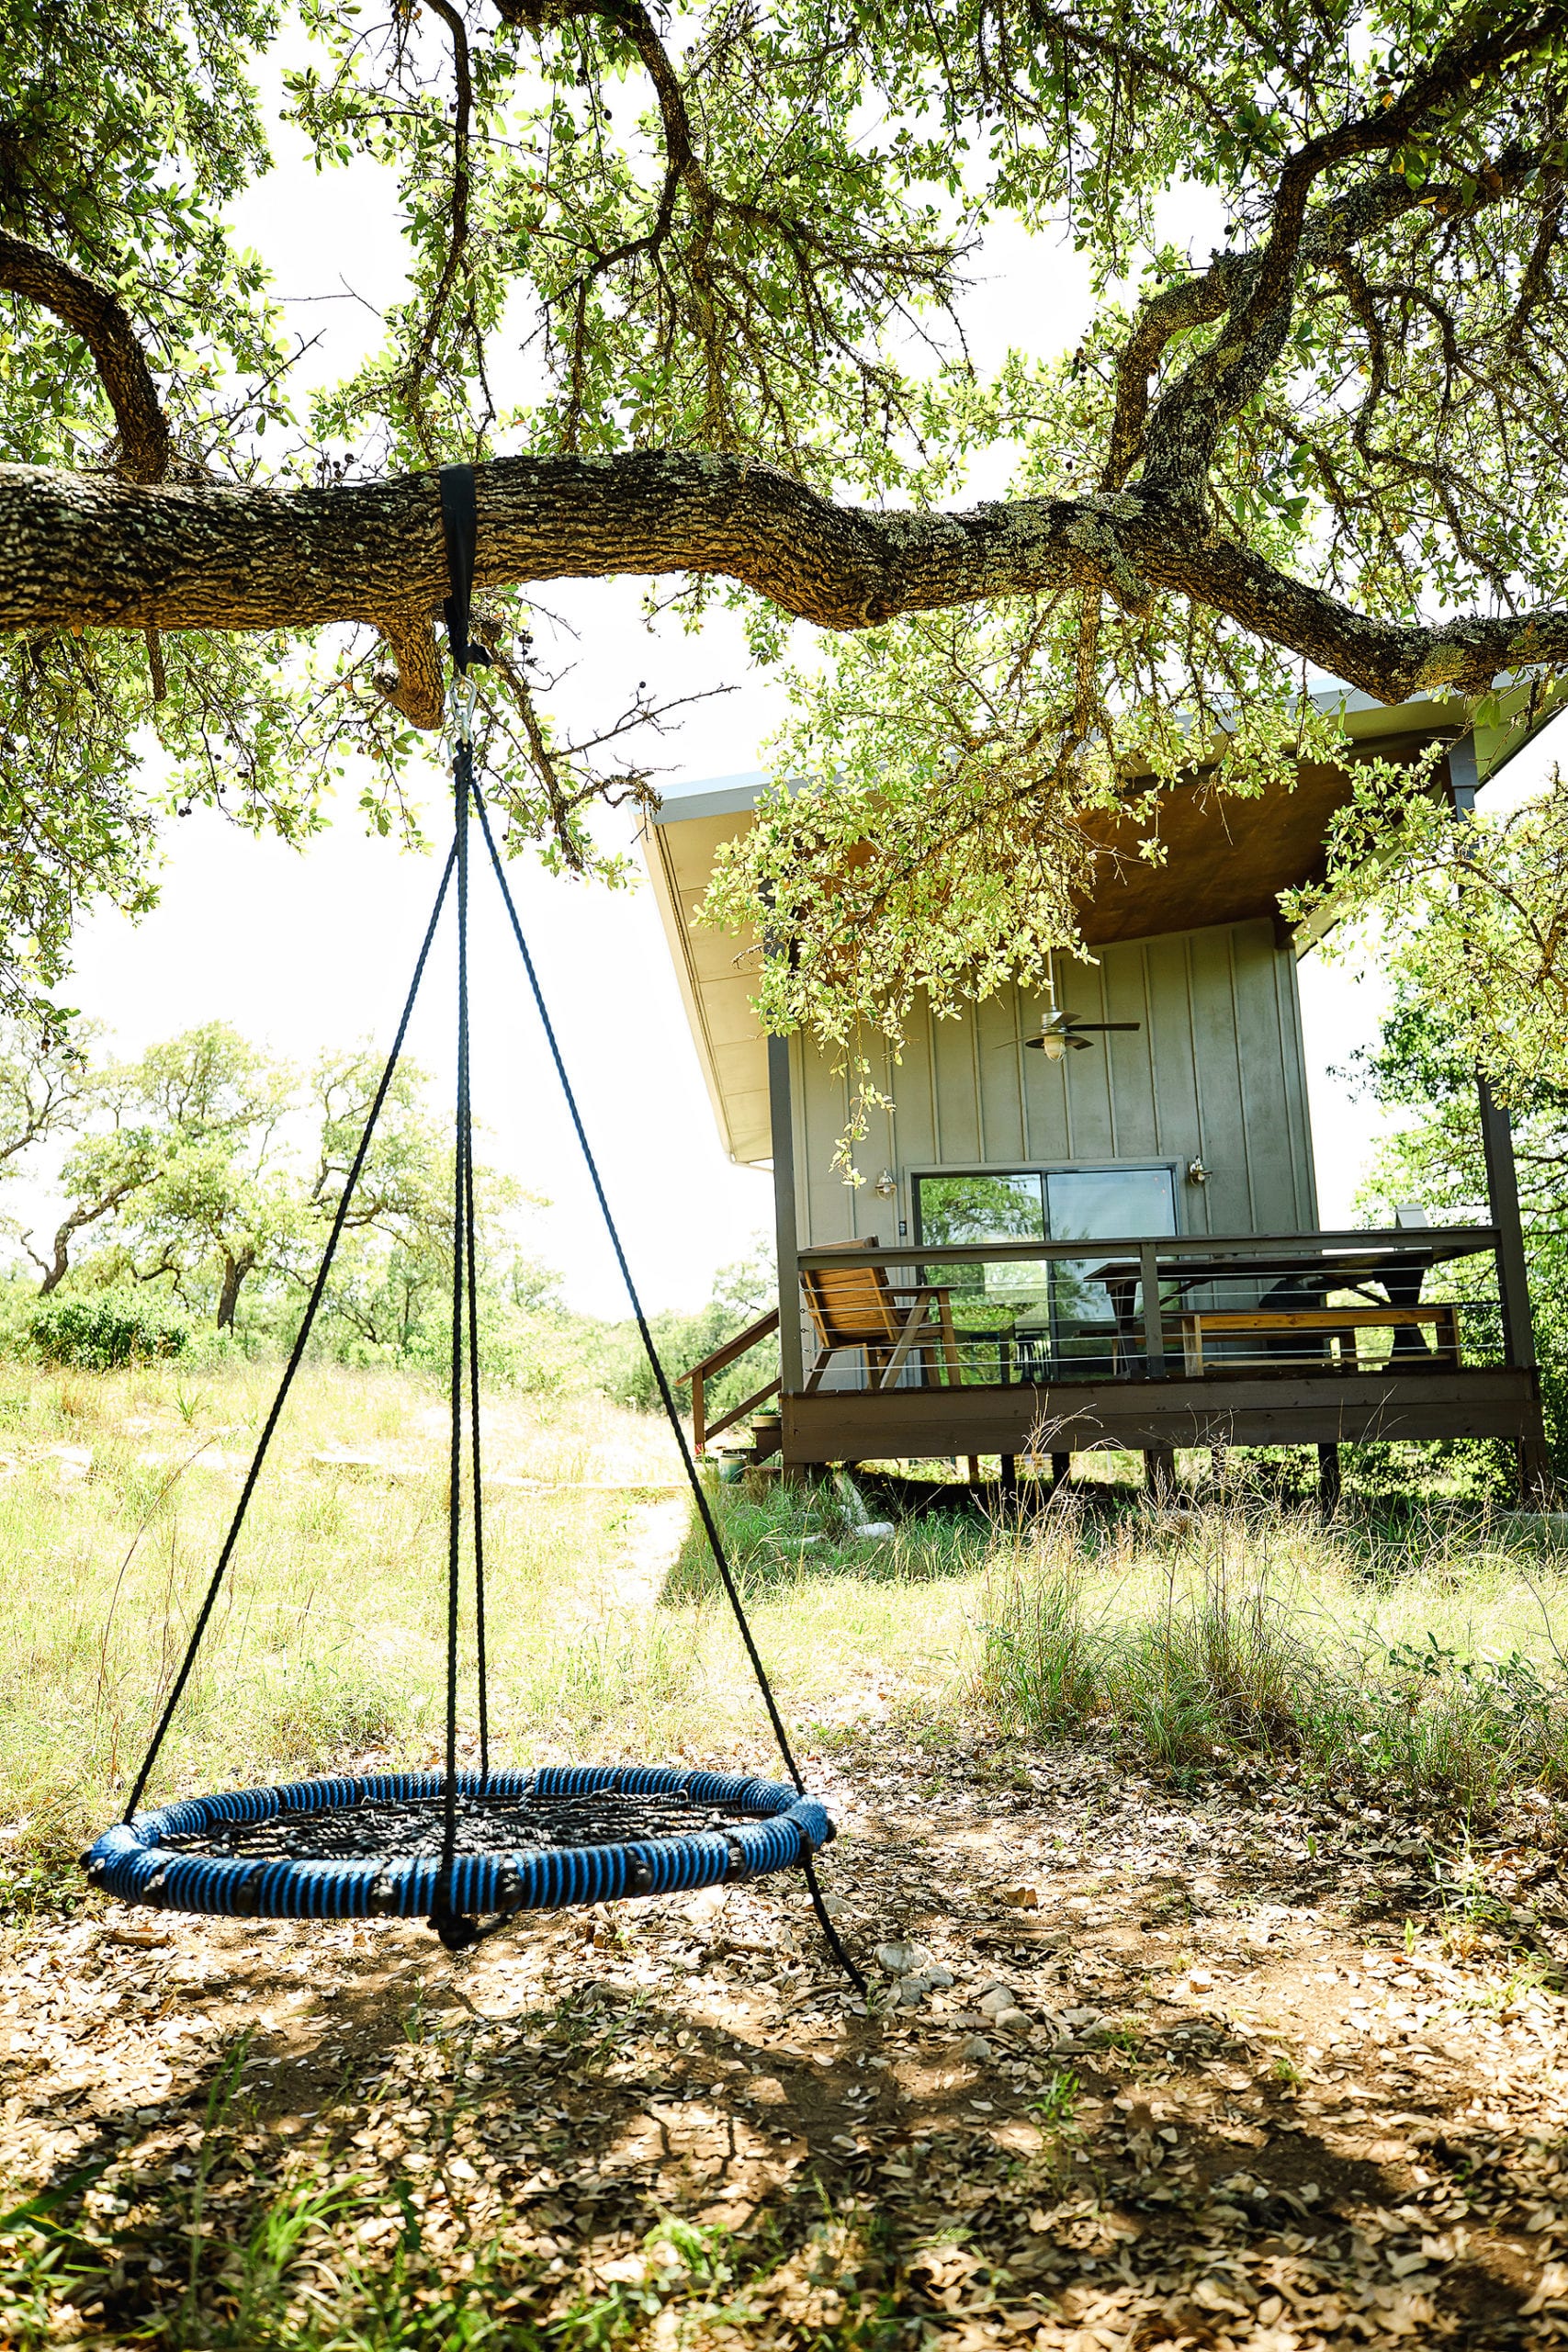 Wanderin Star Farms in Dripping Springs, Texas AirBNB vacation rental tiny cabin